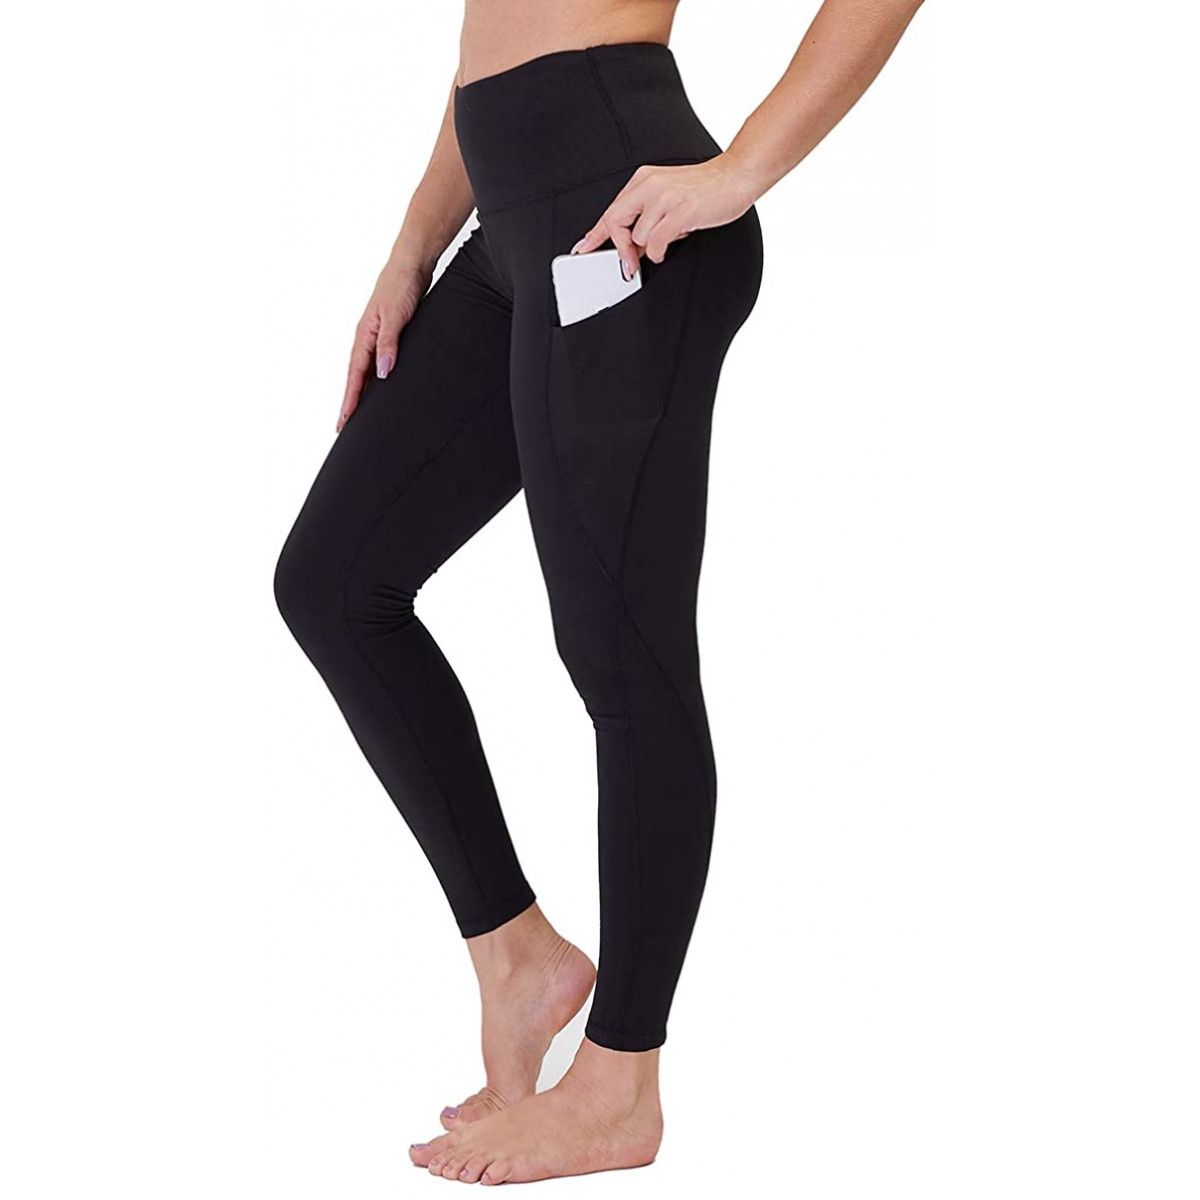  GAYHAY Leggings with Pockets for Women, High Waist